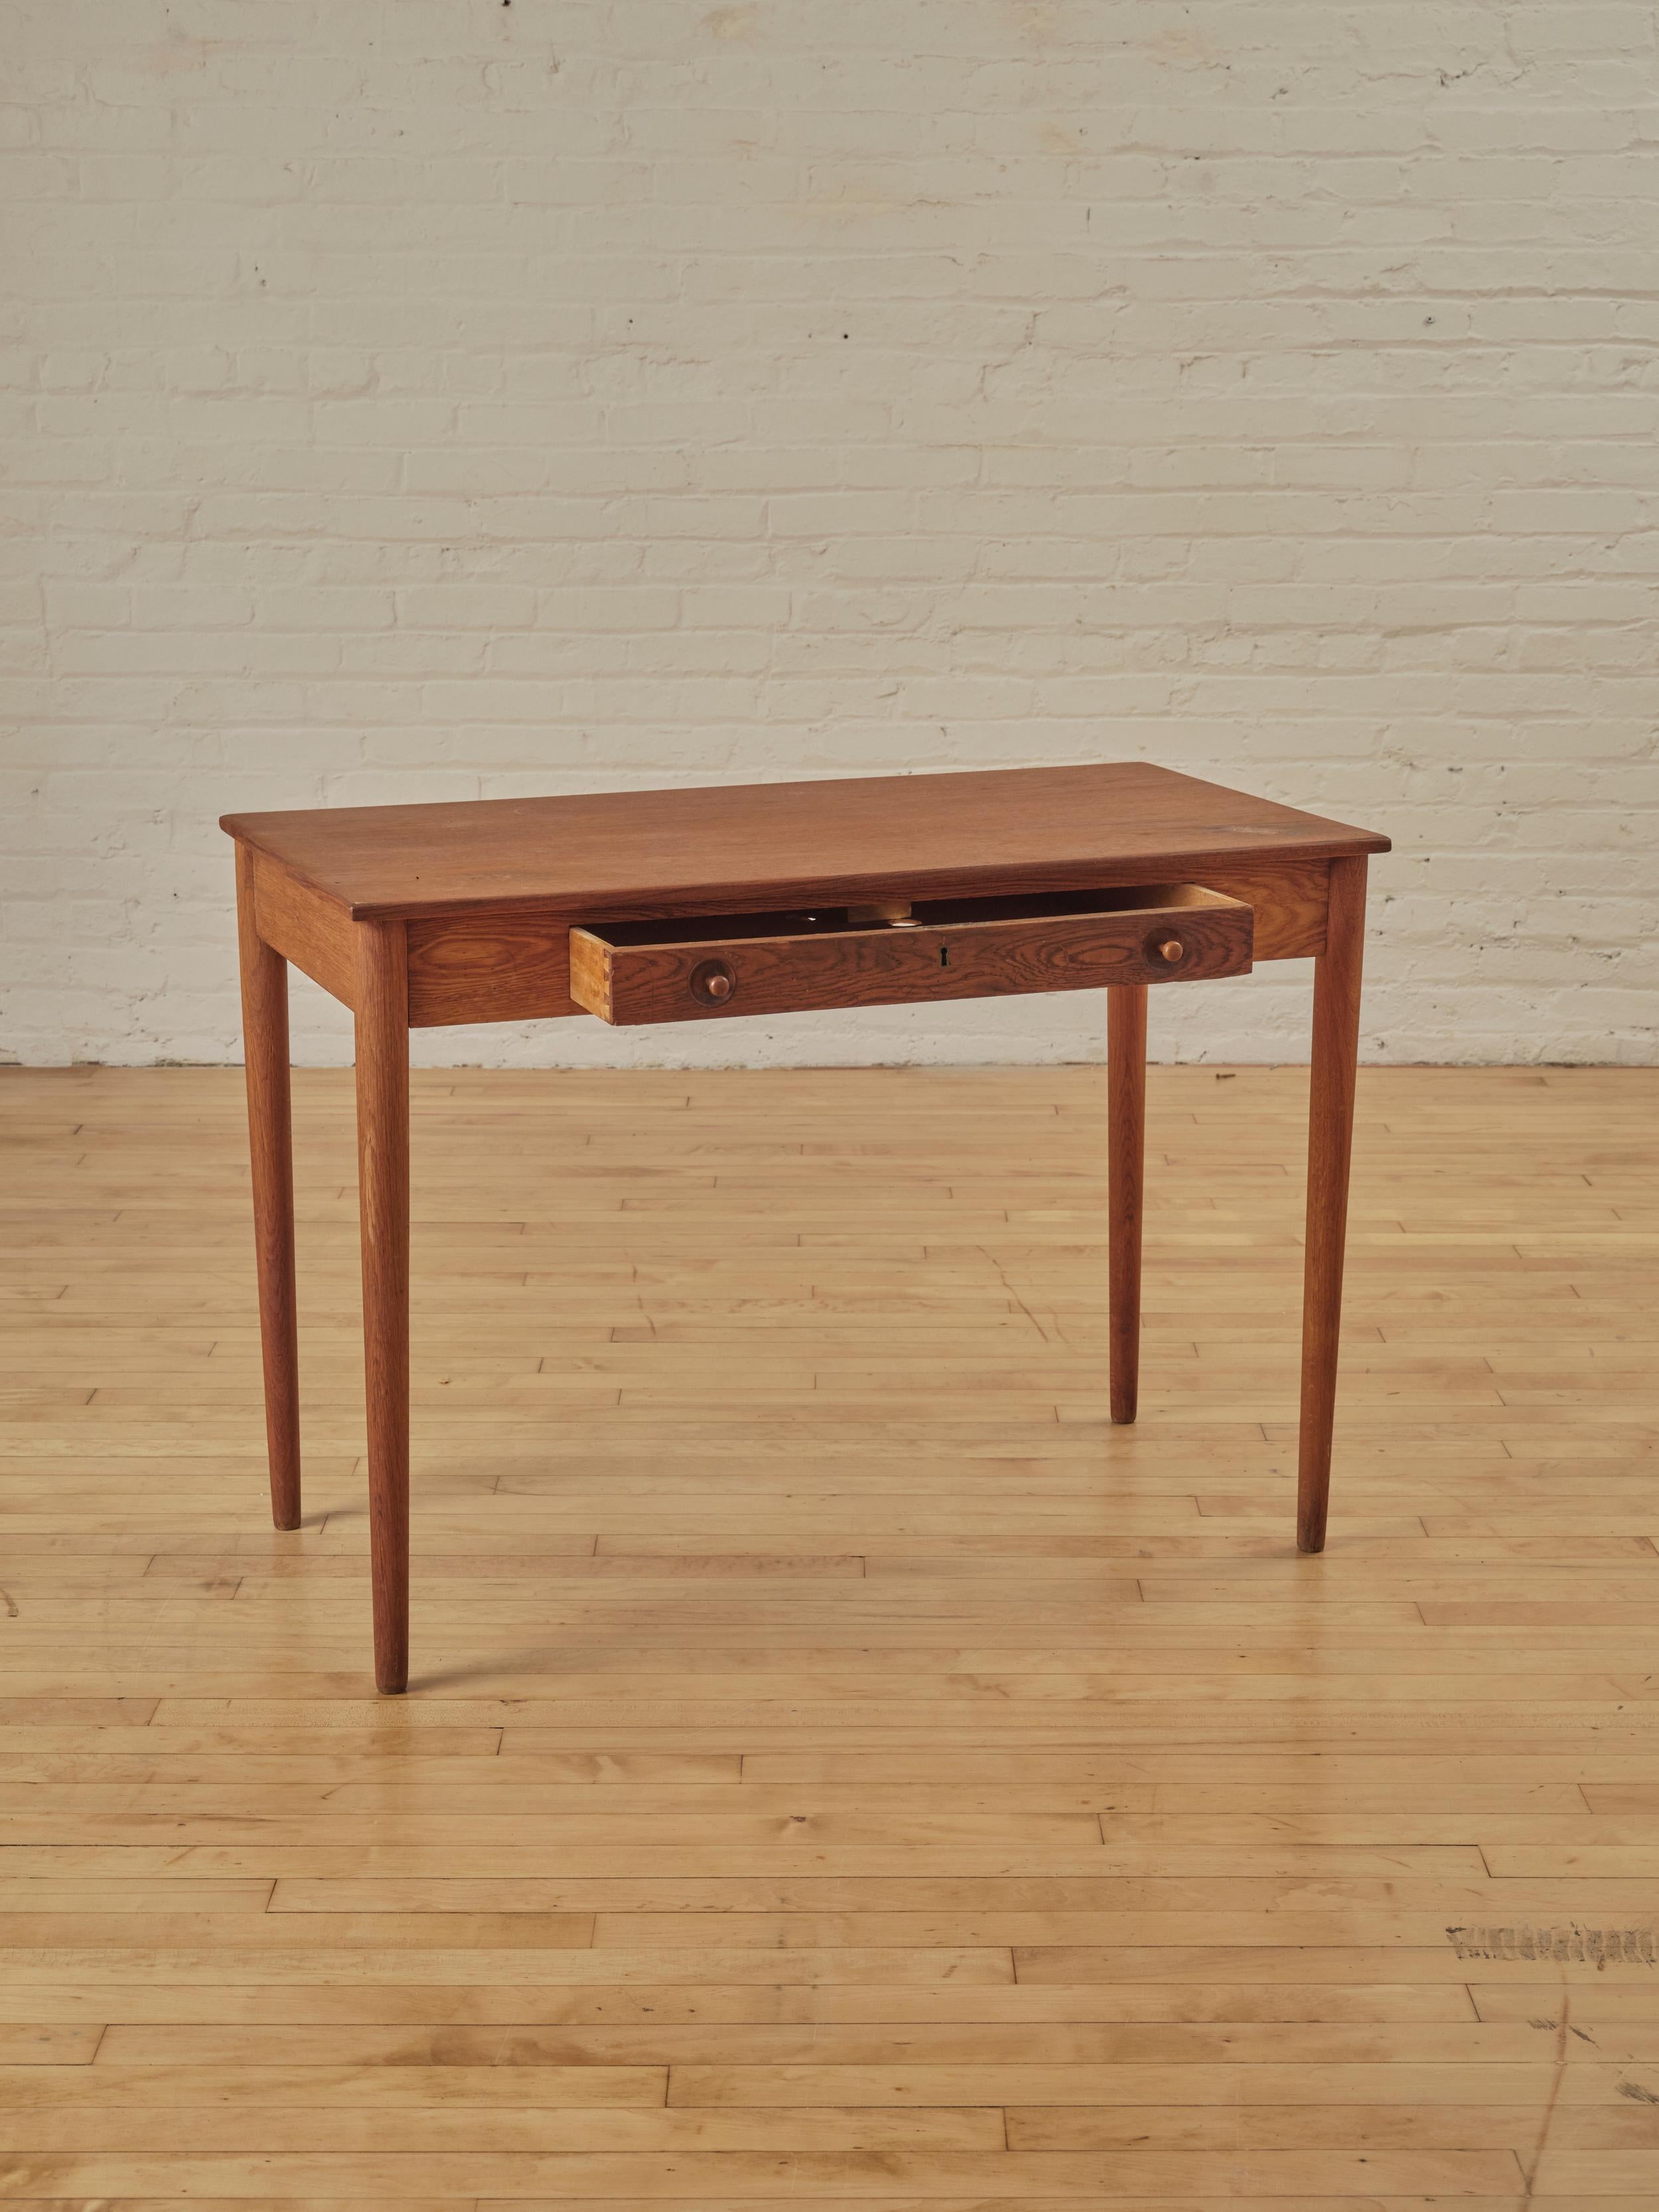 Oak desk by Hans Wegner for Ry Mobler. The legs, drawers, and frame are made from solid, patinated oak, while the top features an oak veneer desktop.